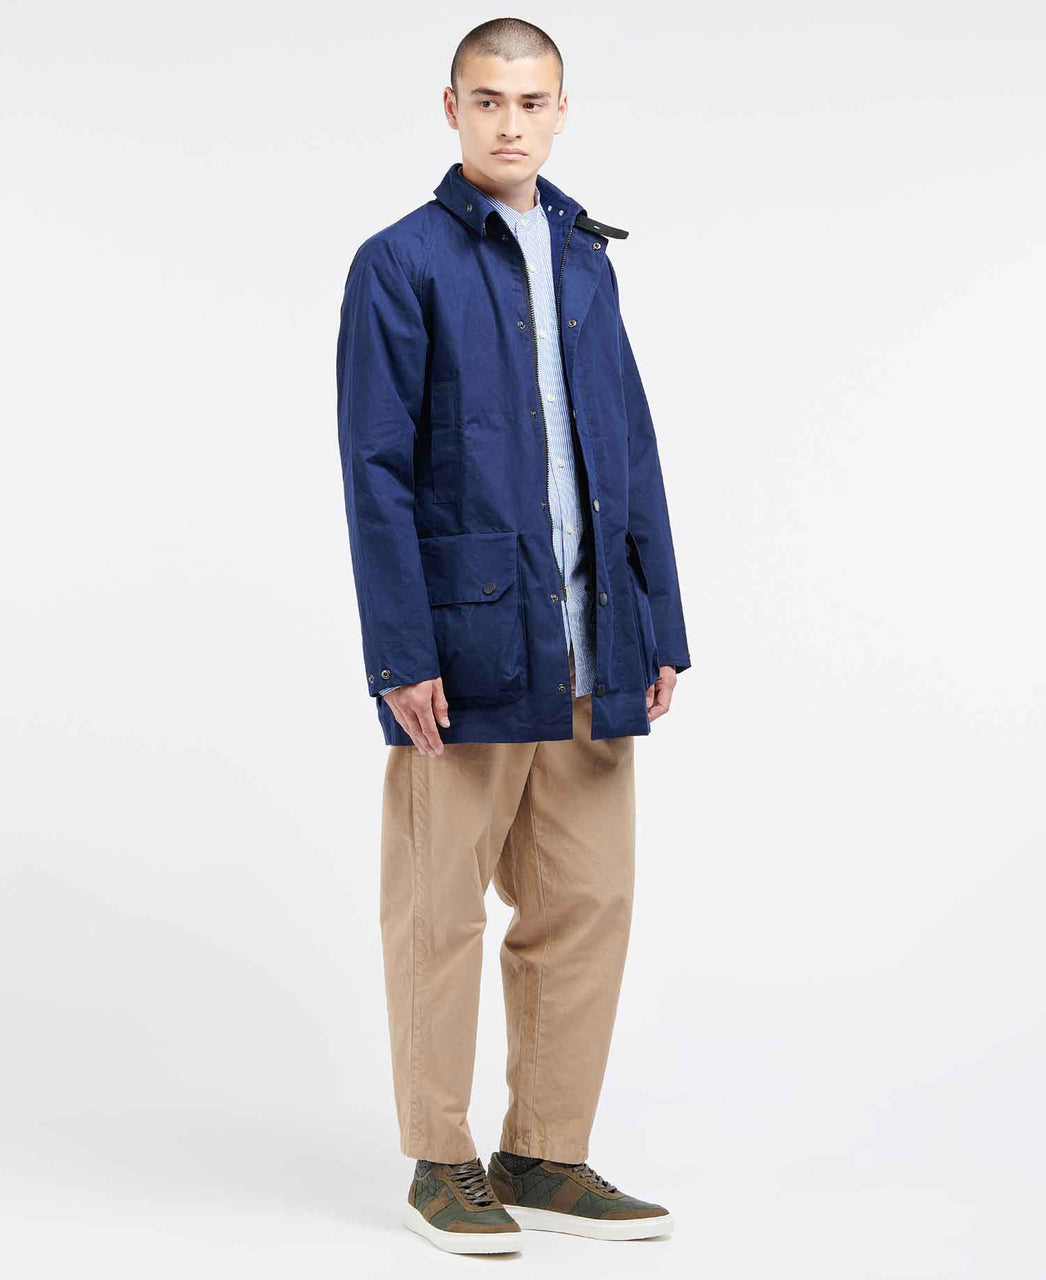 Ally Capellino x Barbour Back Casual Waxed Cotton Jacket in Navy